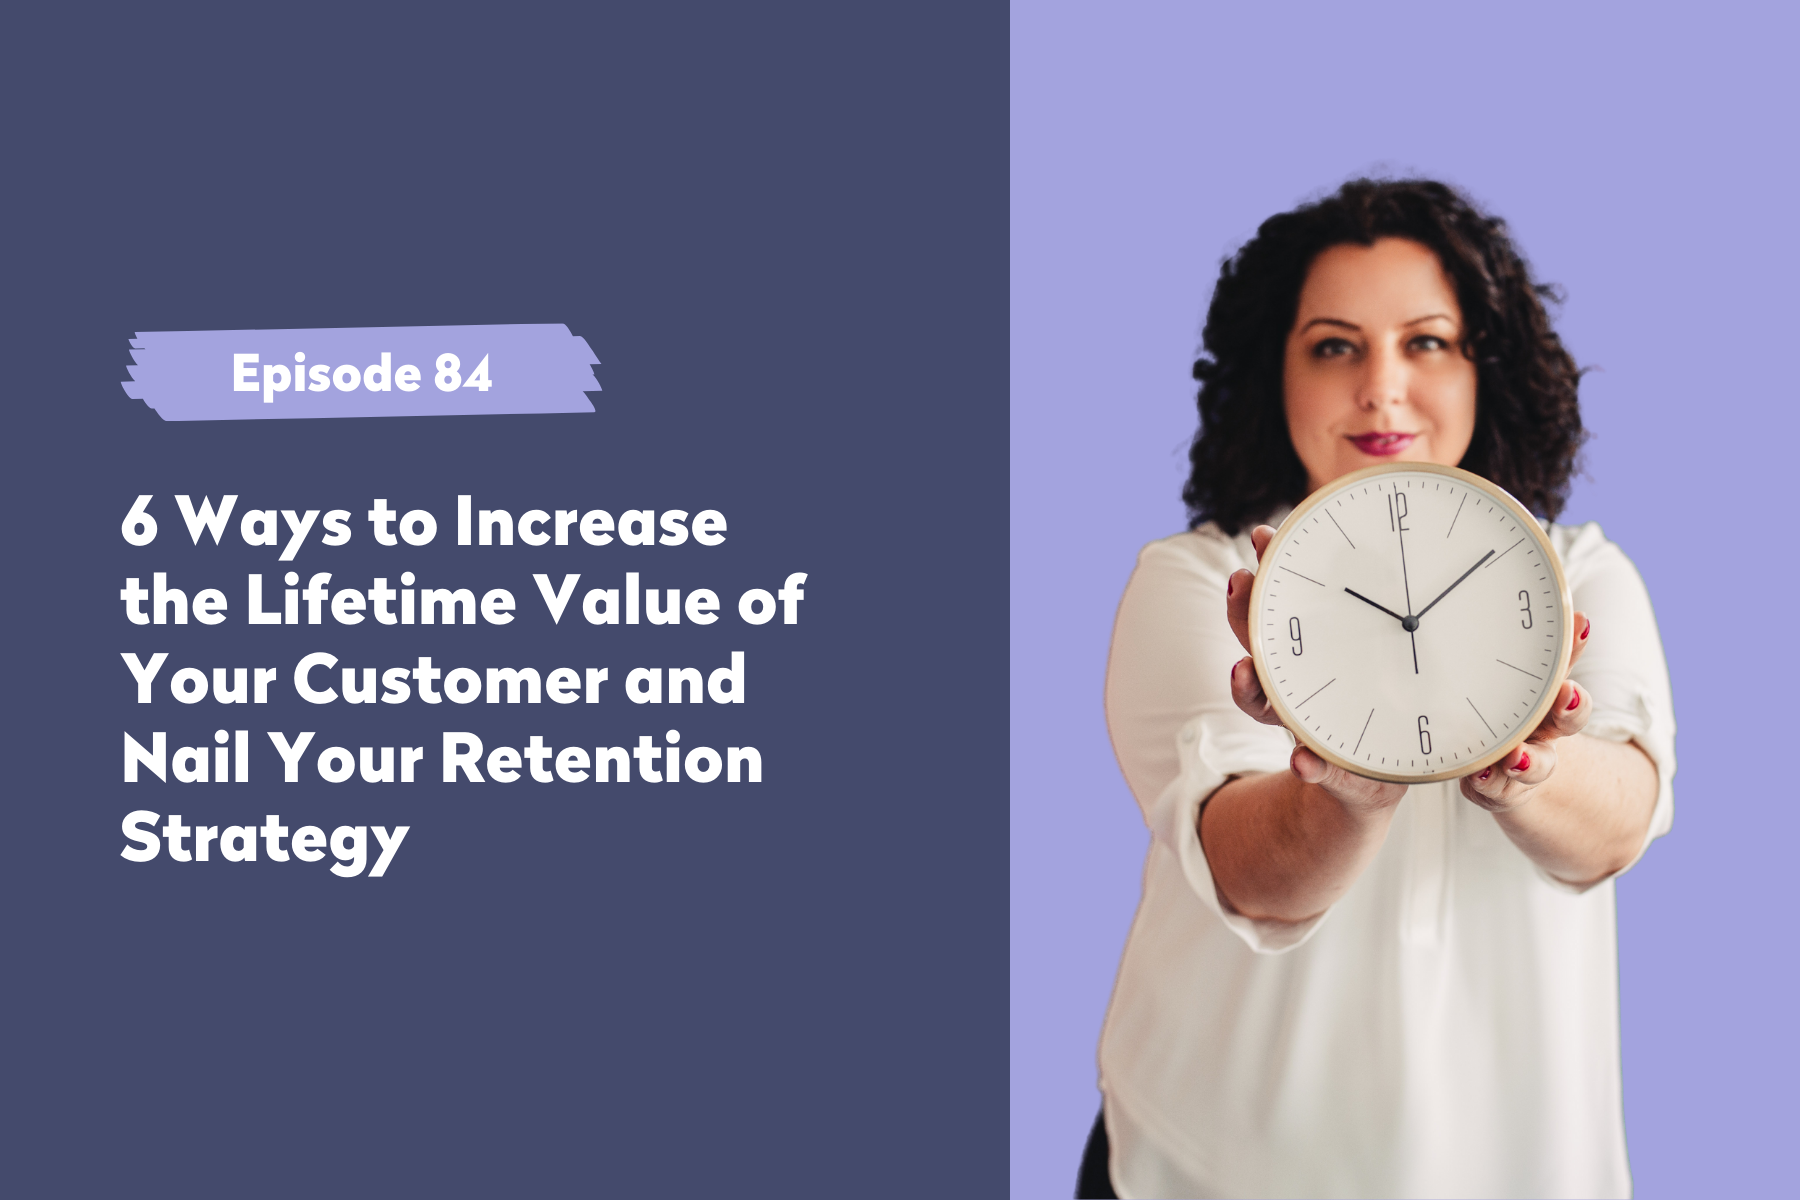 Episode 84 | 6 Ways to Increase the Lifetime Value of Your Customer and Nail Your Retention Strategy